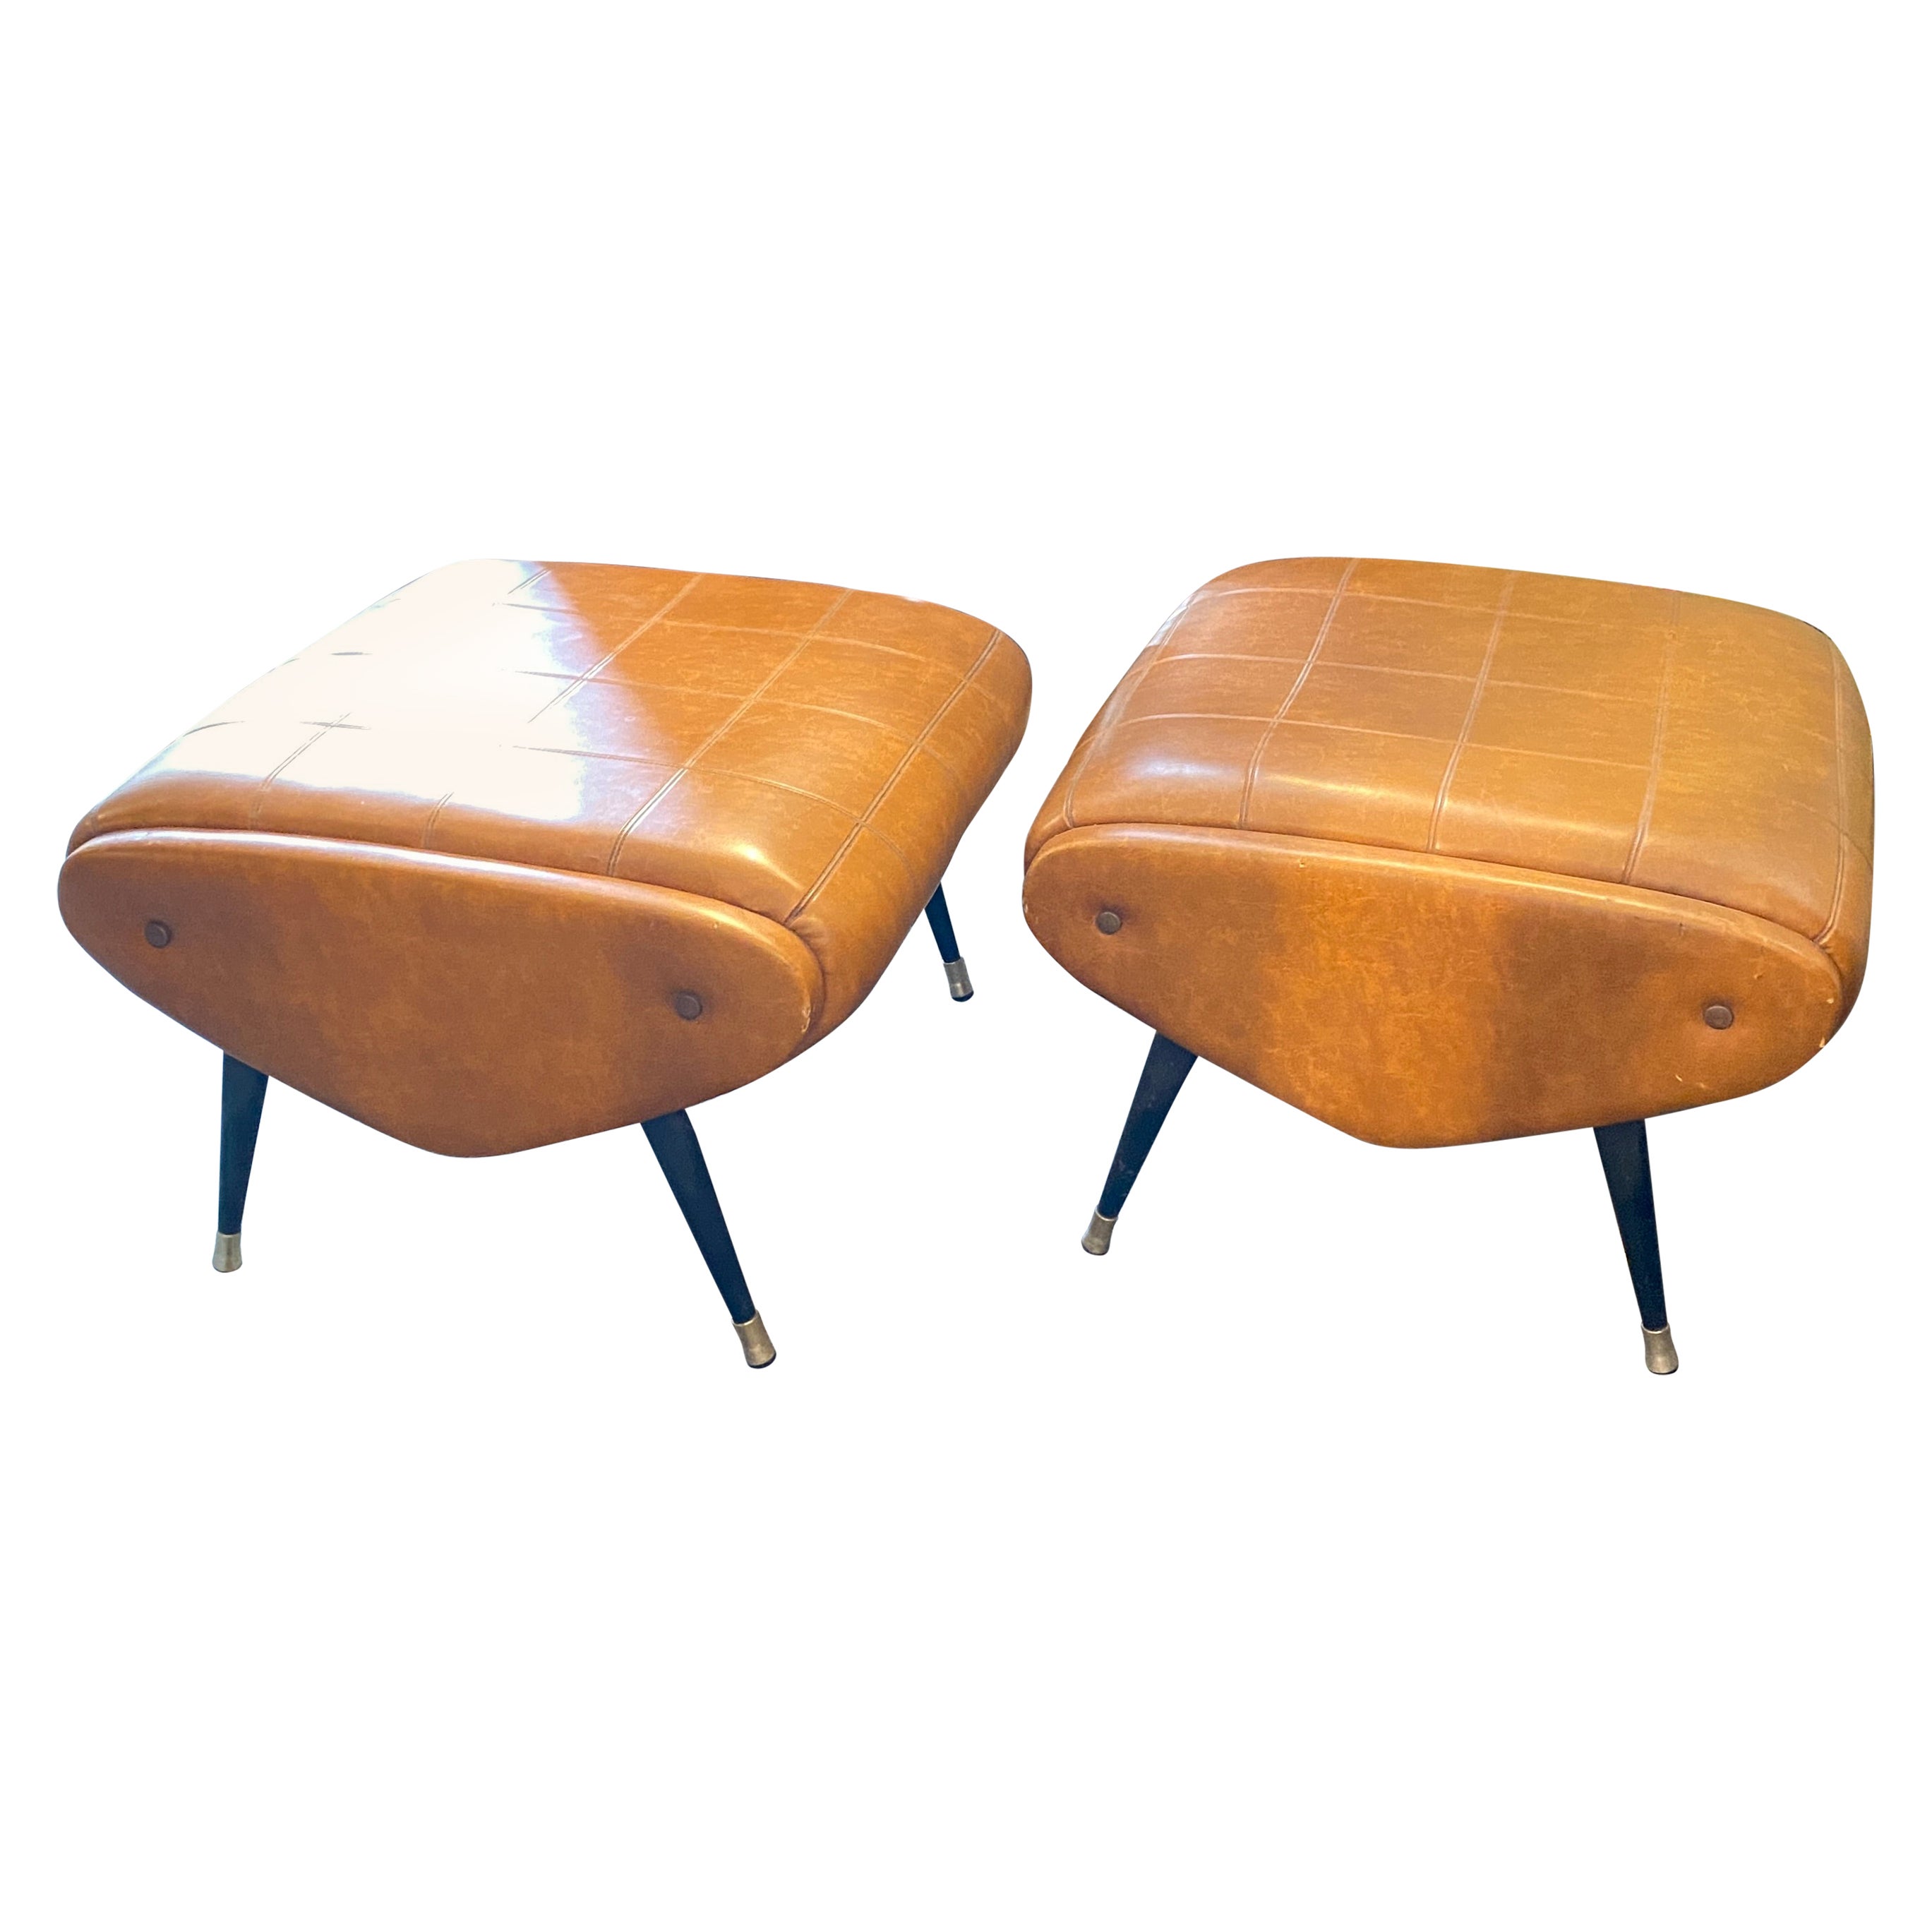 1960s Set of Two Mid-Century Modern Large Italian Poufs For Sale at 1stDibs